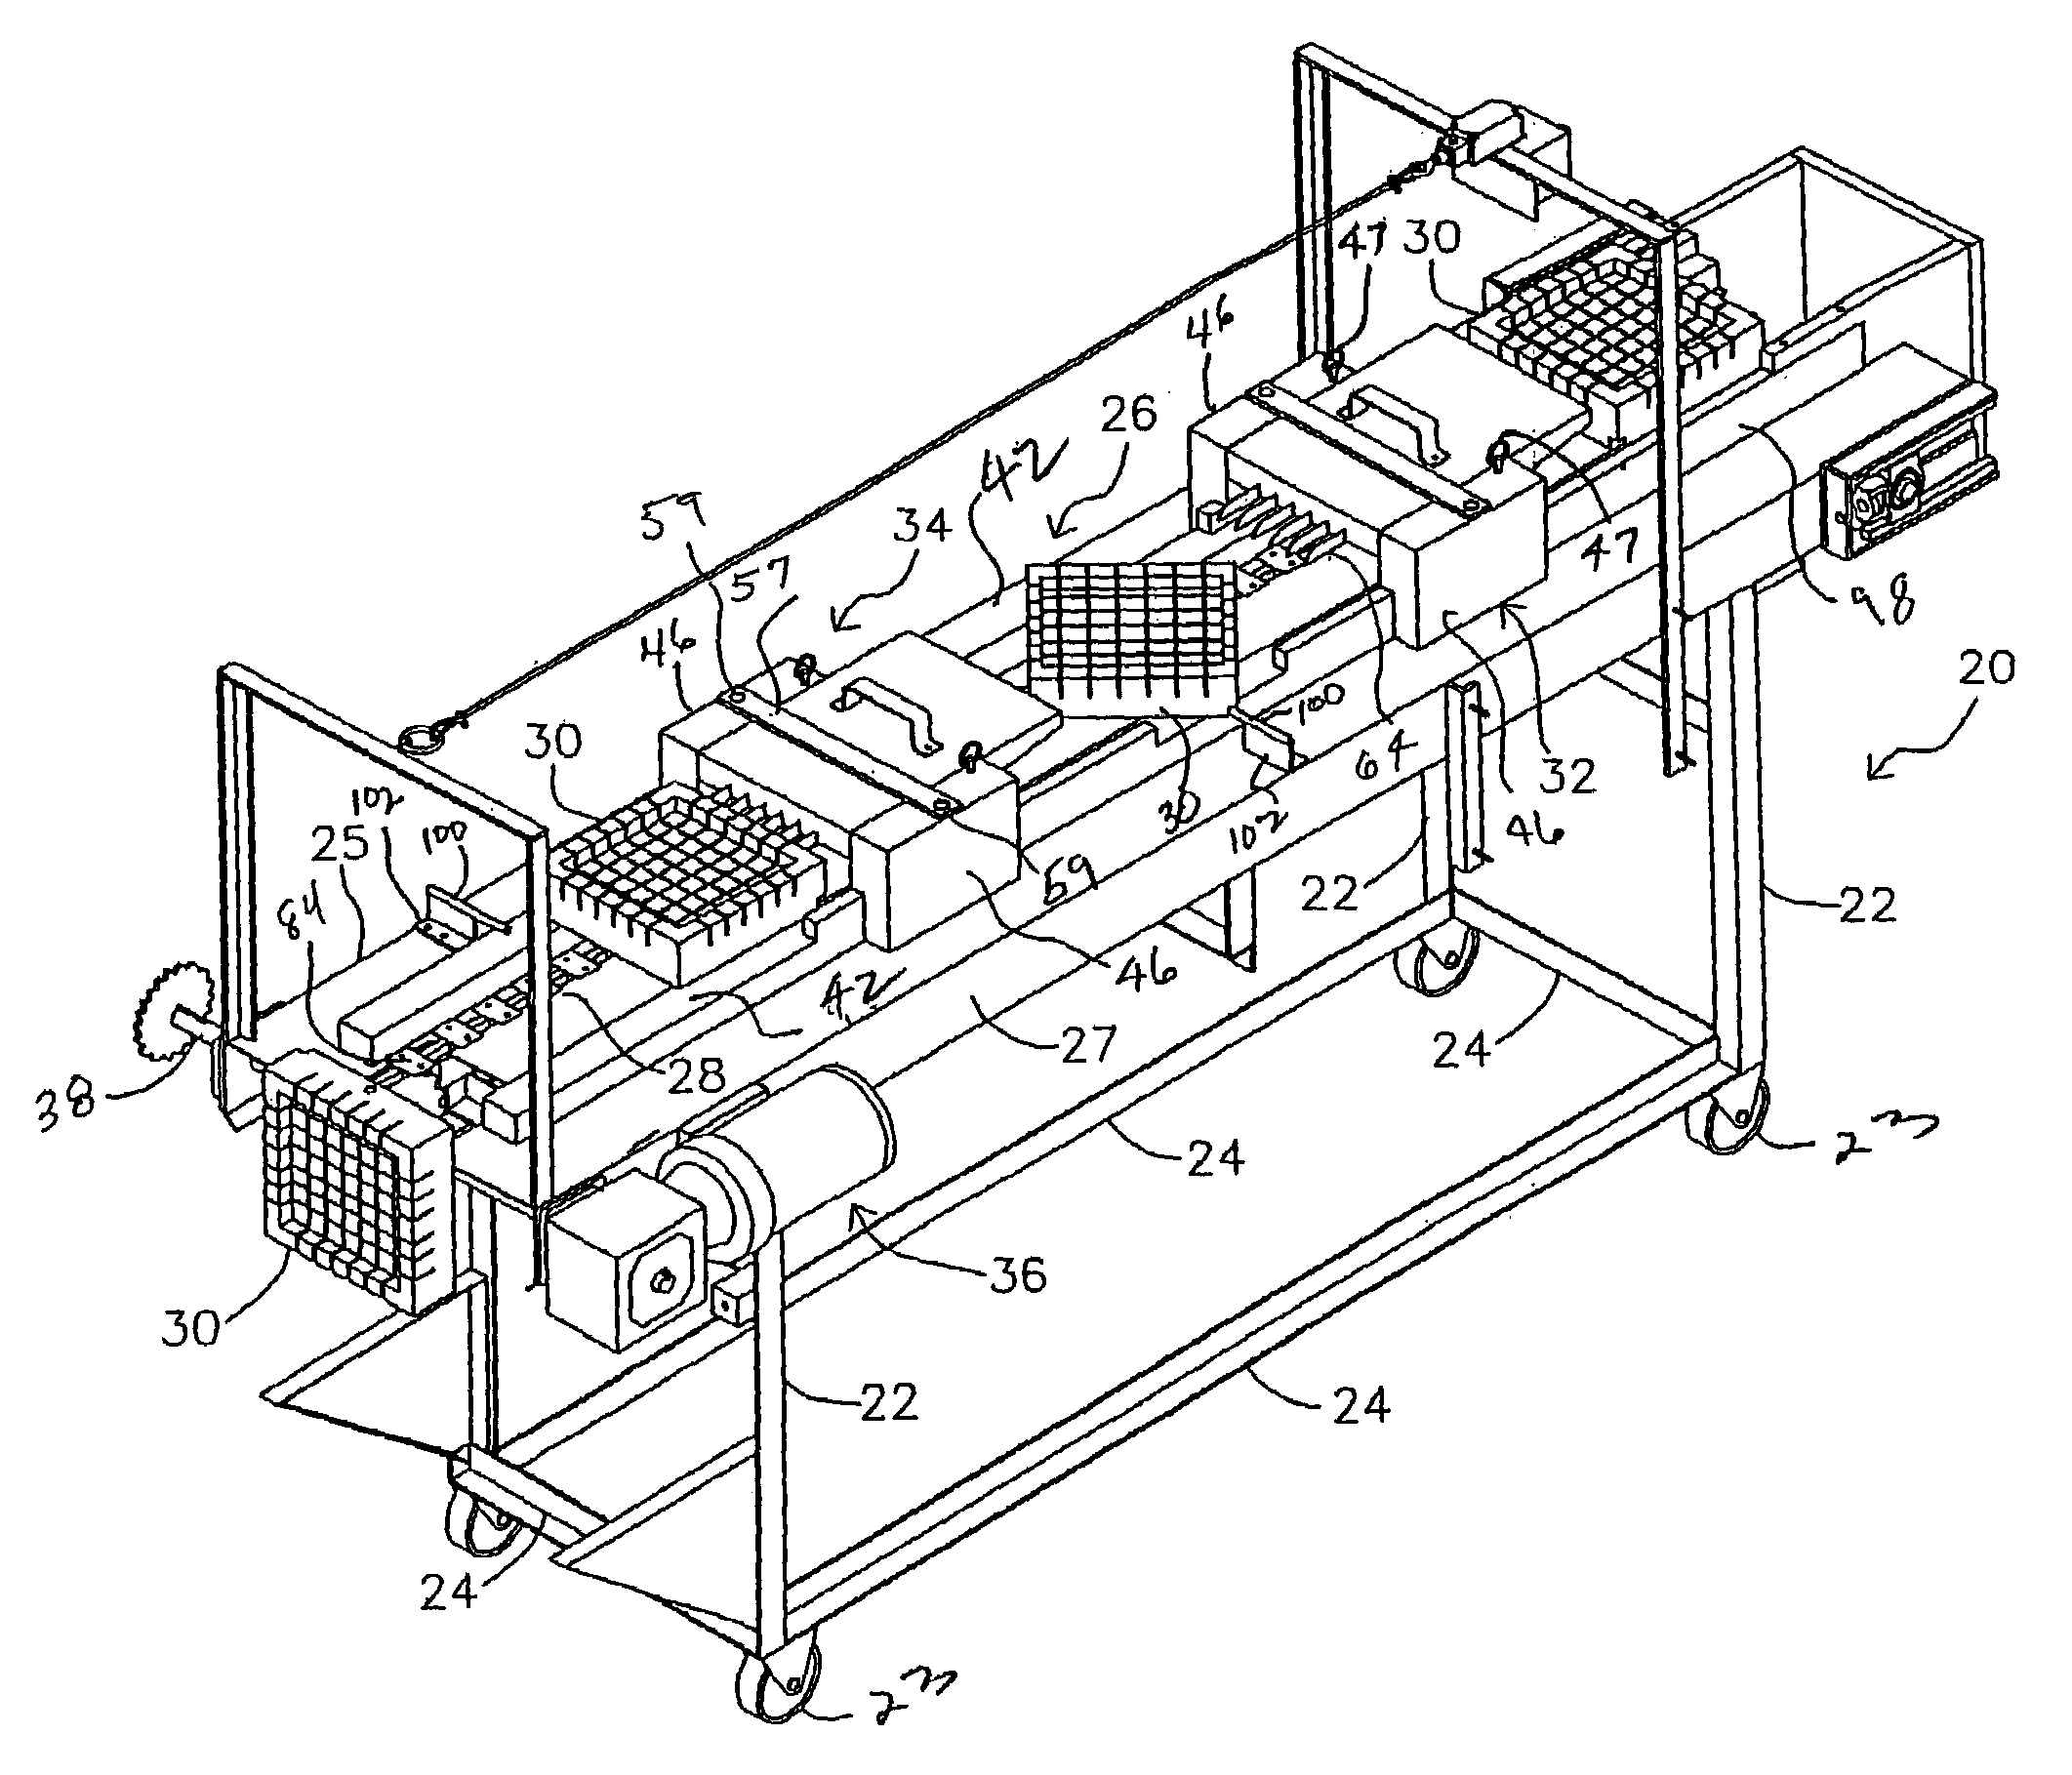 Apparatus and method for producing controlled portions of meat products